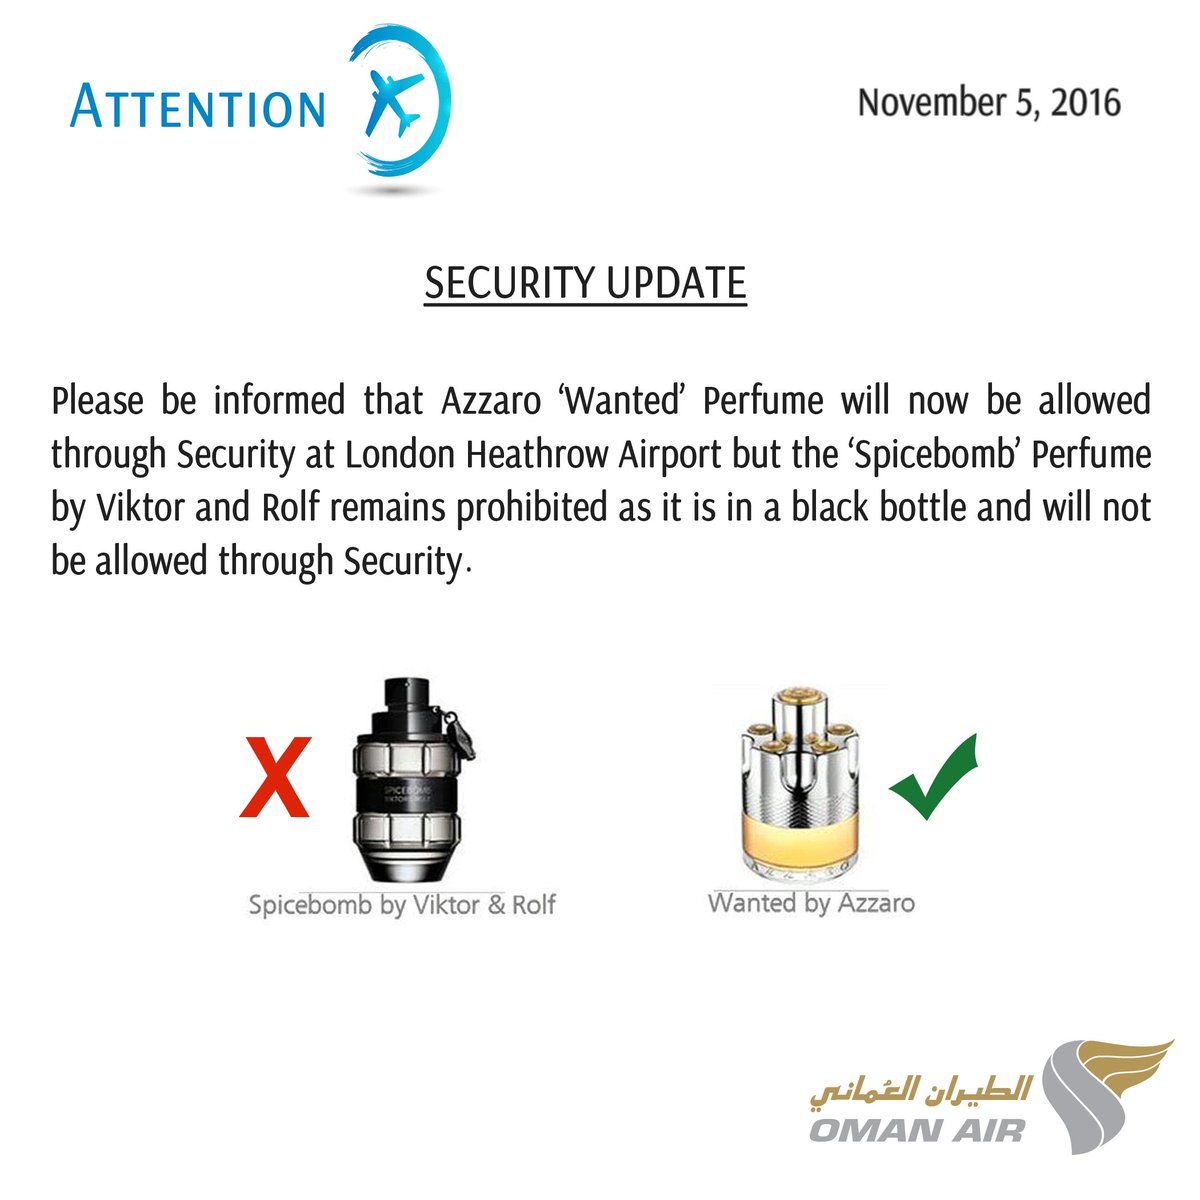 “Wanted” perfume can be carried to London, says Oman Air